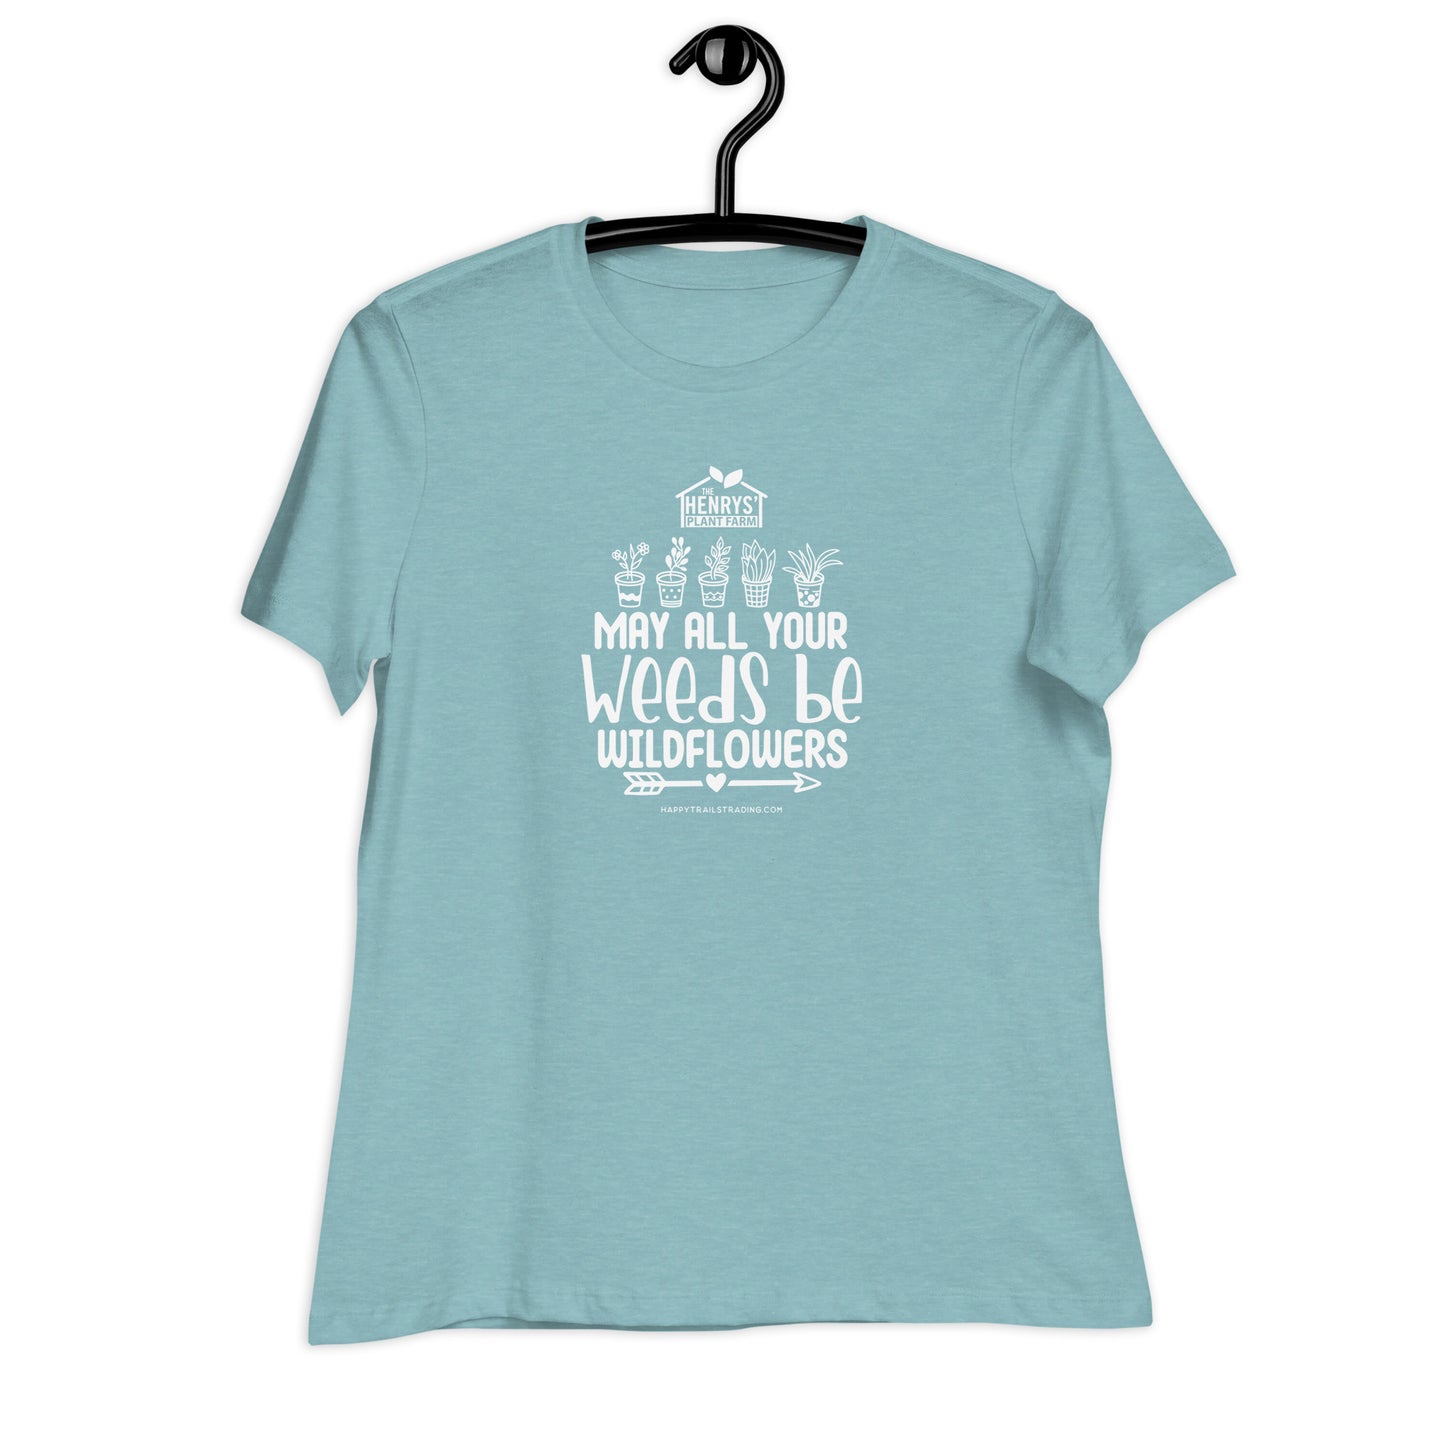 Wildflowers - Women's Relaxed T-Shirt